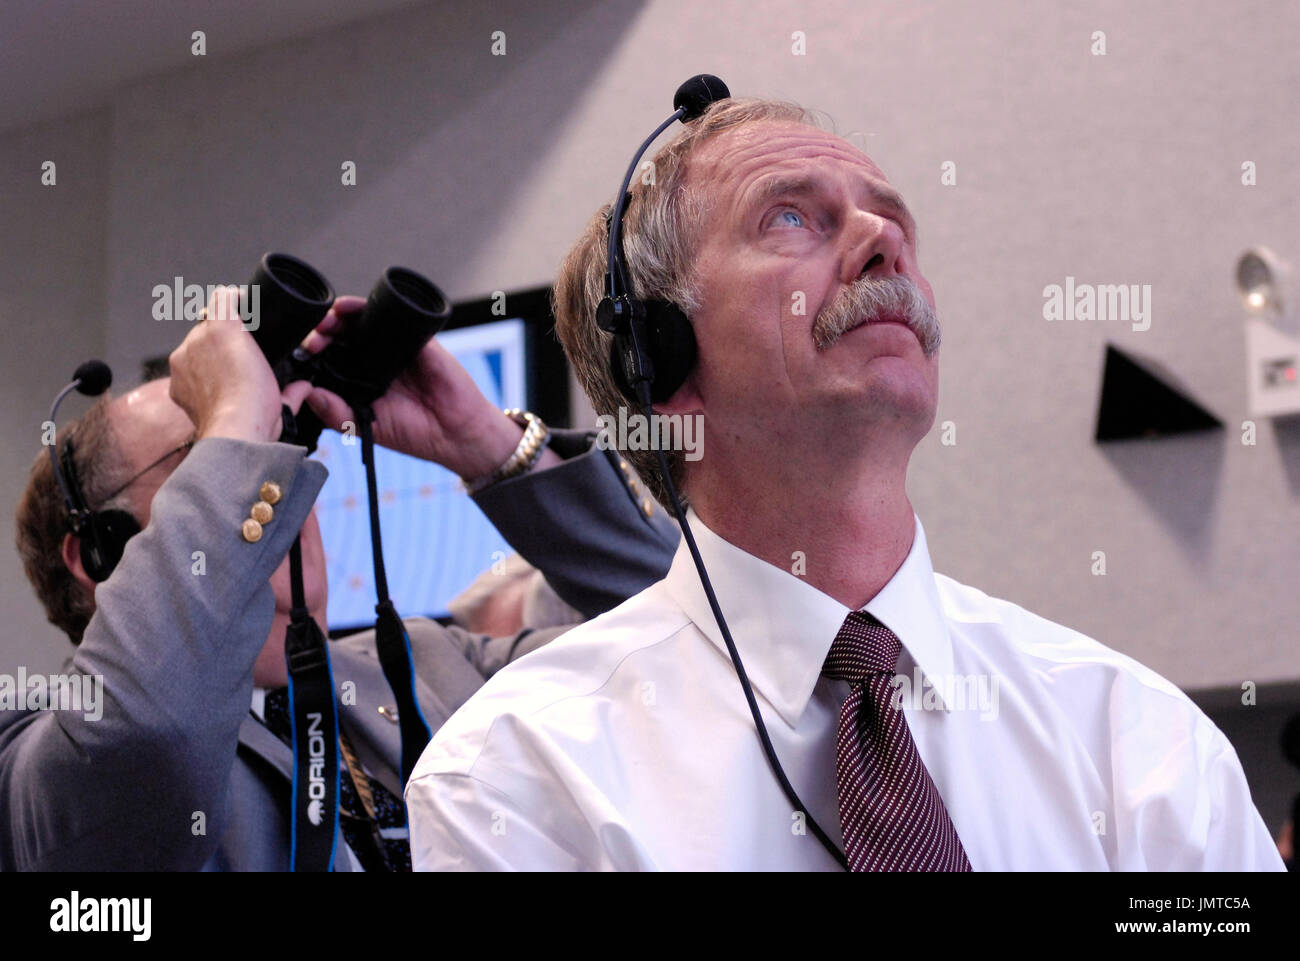 Kennedy Space Center, FL - August 8, 2007 -- National Aeronautics and Space Administration (NASA) Associate Administrator for Space Operations, Bill Gerstenmaier (foreground) watches the launch of the Space Shuttle Endeavour (STS-118) from the Launch Control Center Wednesday, August 8, 2007, at the Kennedy Space Center in Cape Canaveral, Florida. The Shuttle lifted off from launch pad 39A at 6:36p.m. EDT.  Credit: Bill Ingalls - NASA via CNP Stock Photo